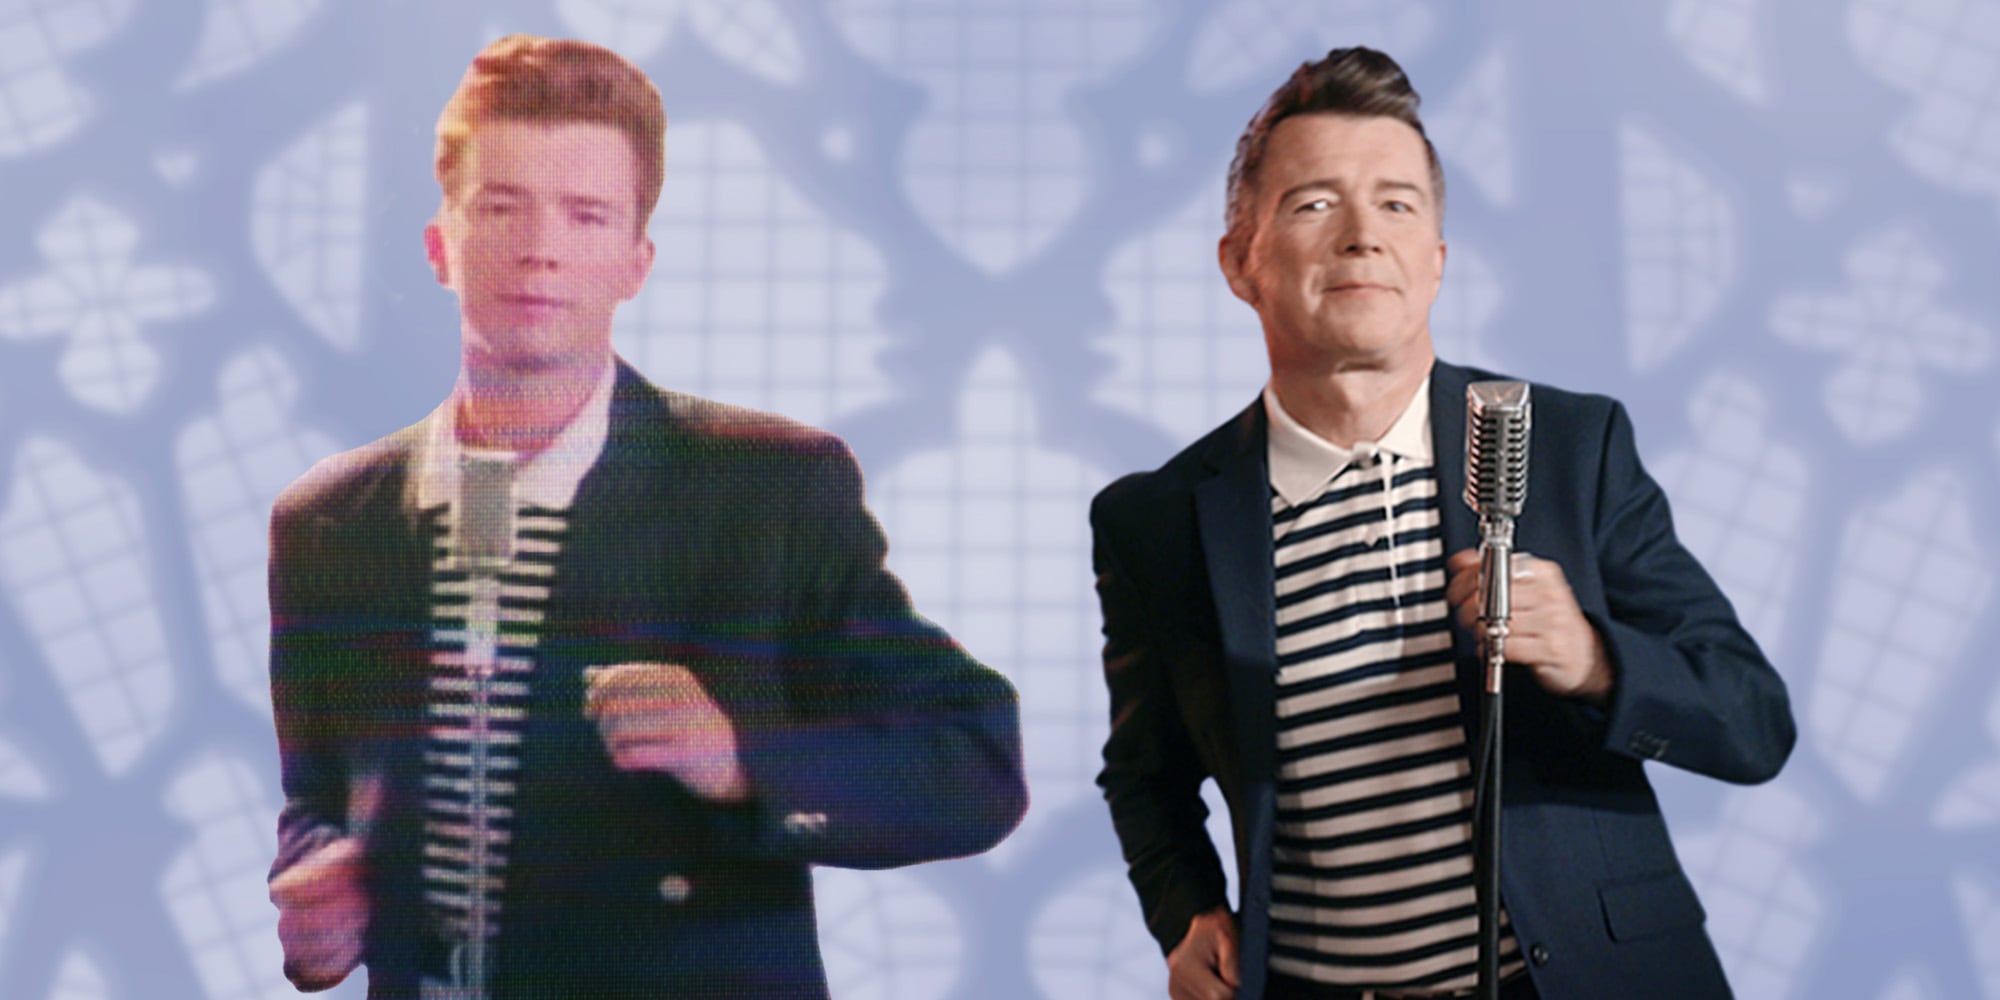 Never gonna give you up recreation